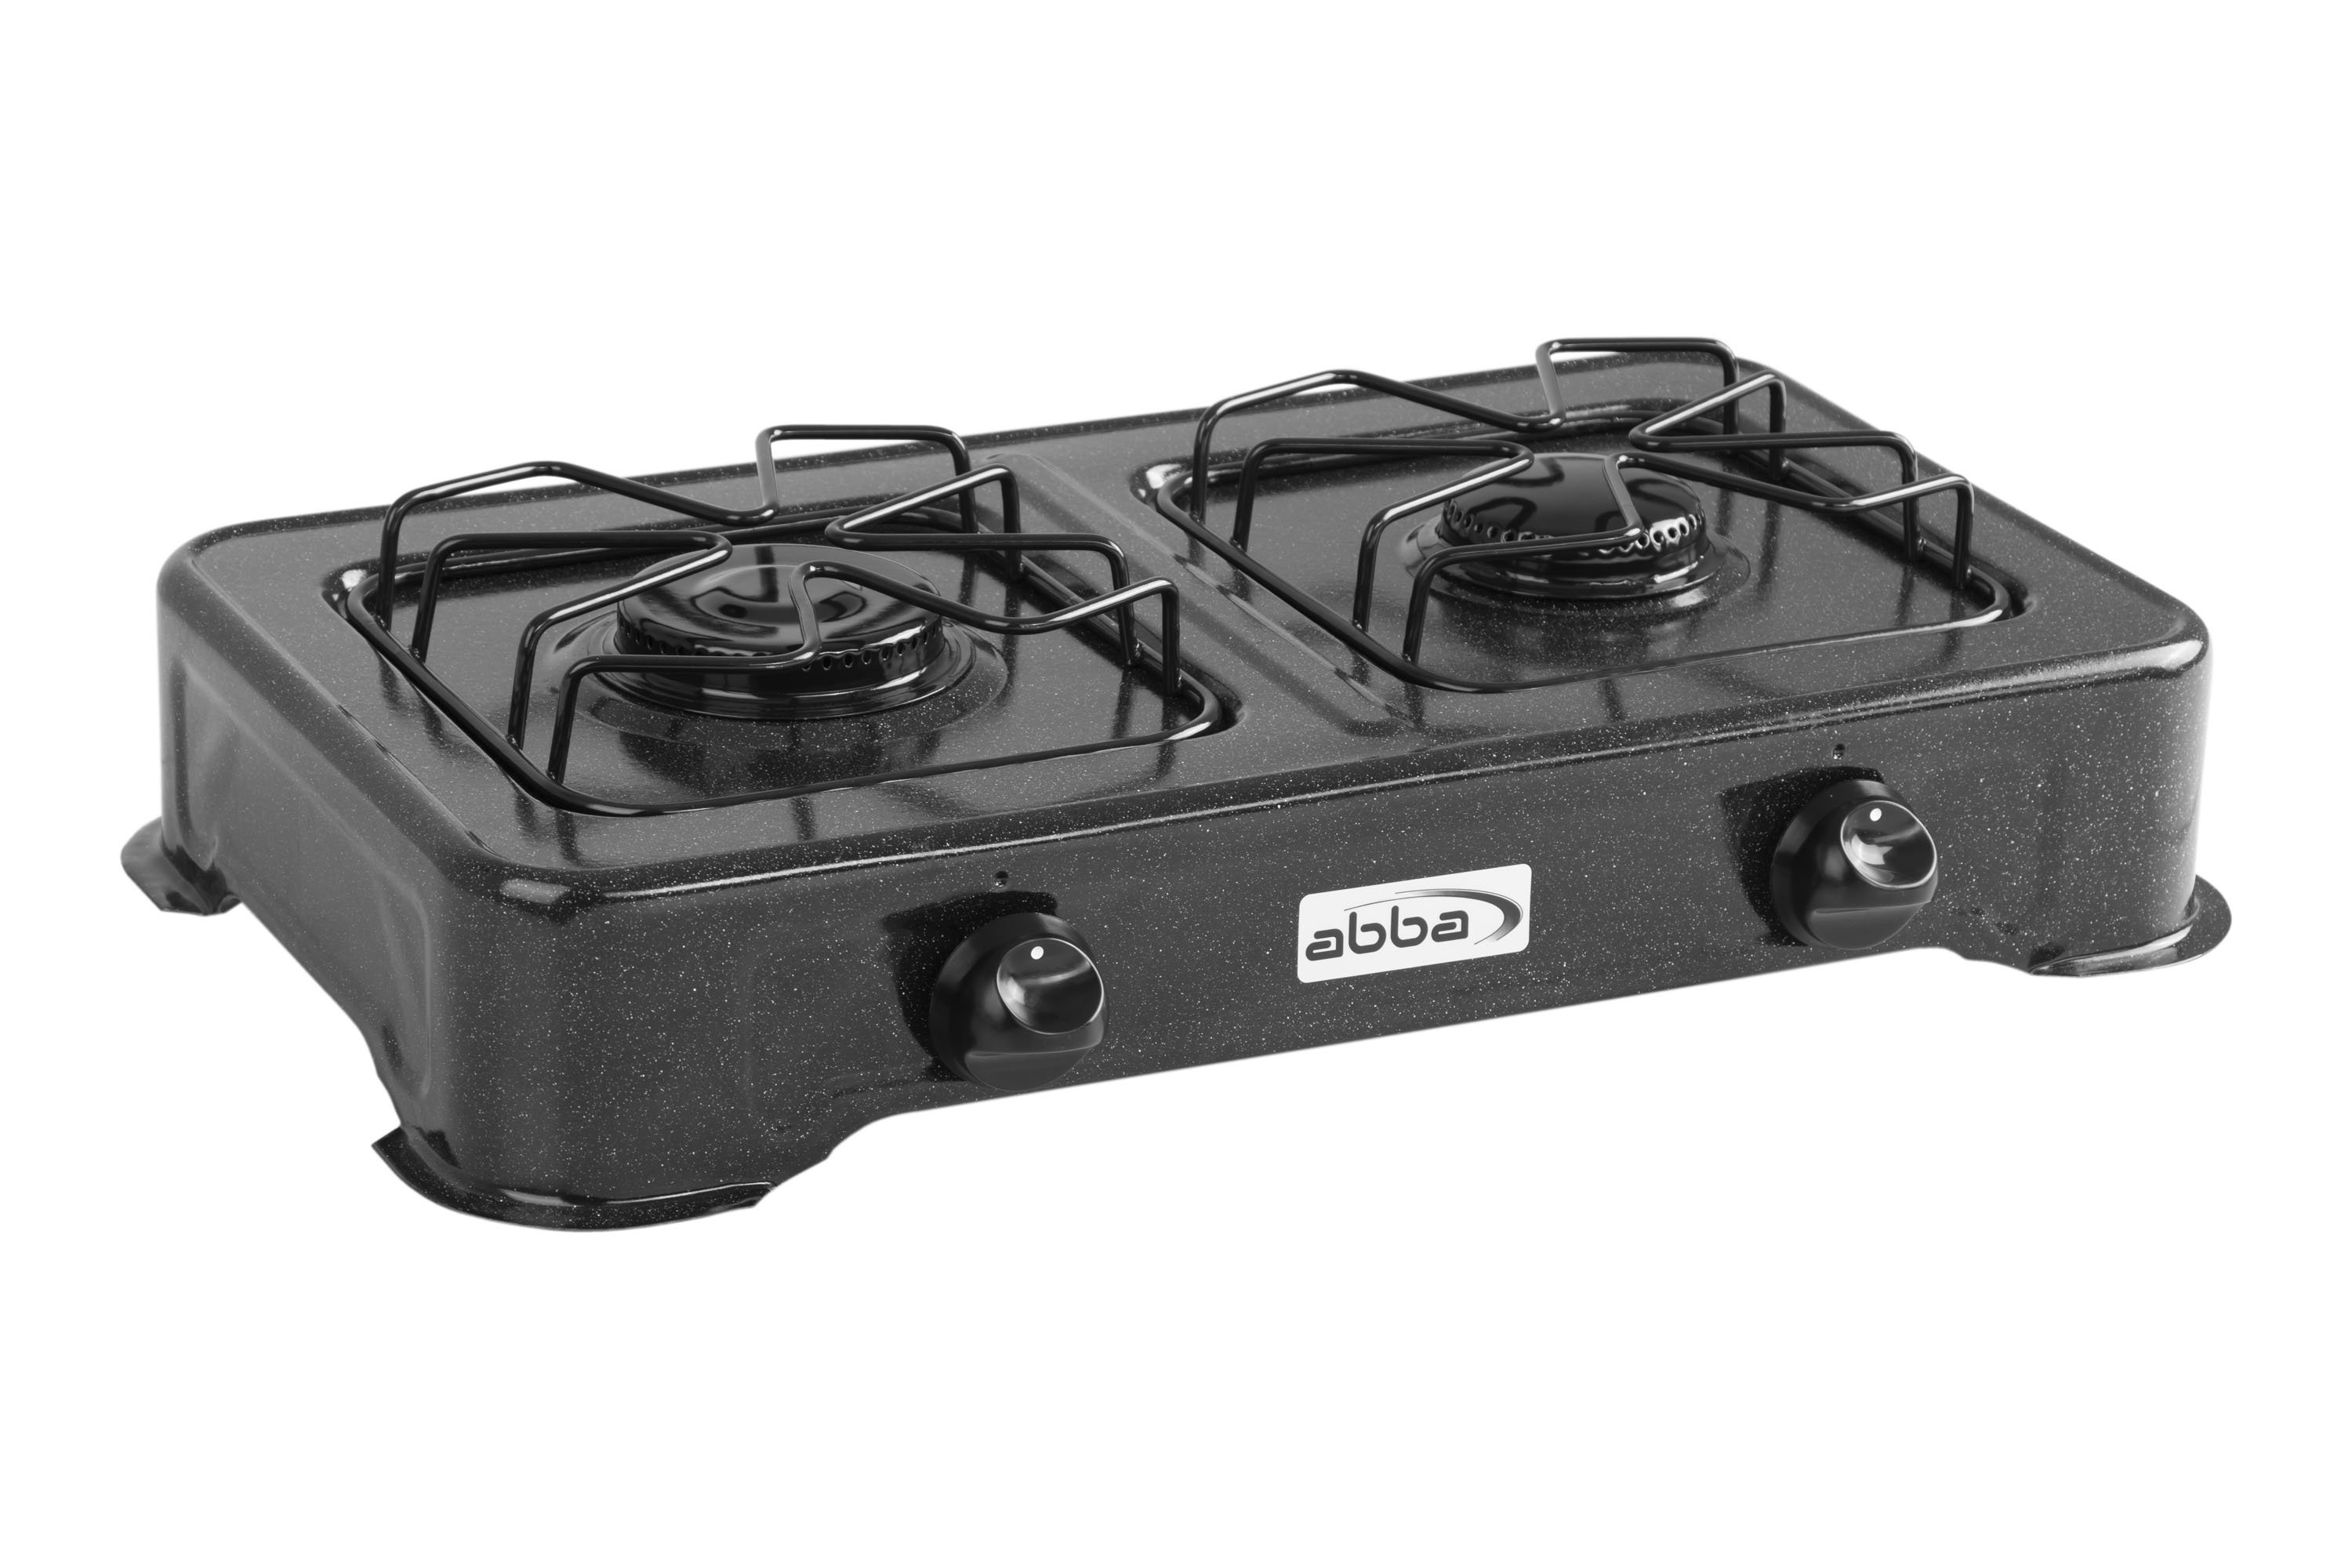 Abba Double Burner Portable Propane Stovetop - Lightweight Alloy Steel Portable Stove - Stove for Camping, Patio & Outdoor Activities, 13.19 x